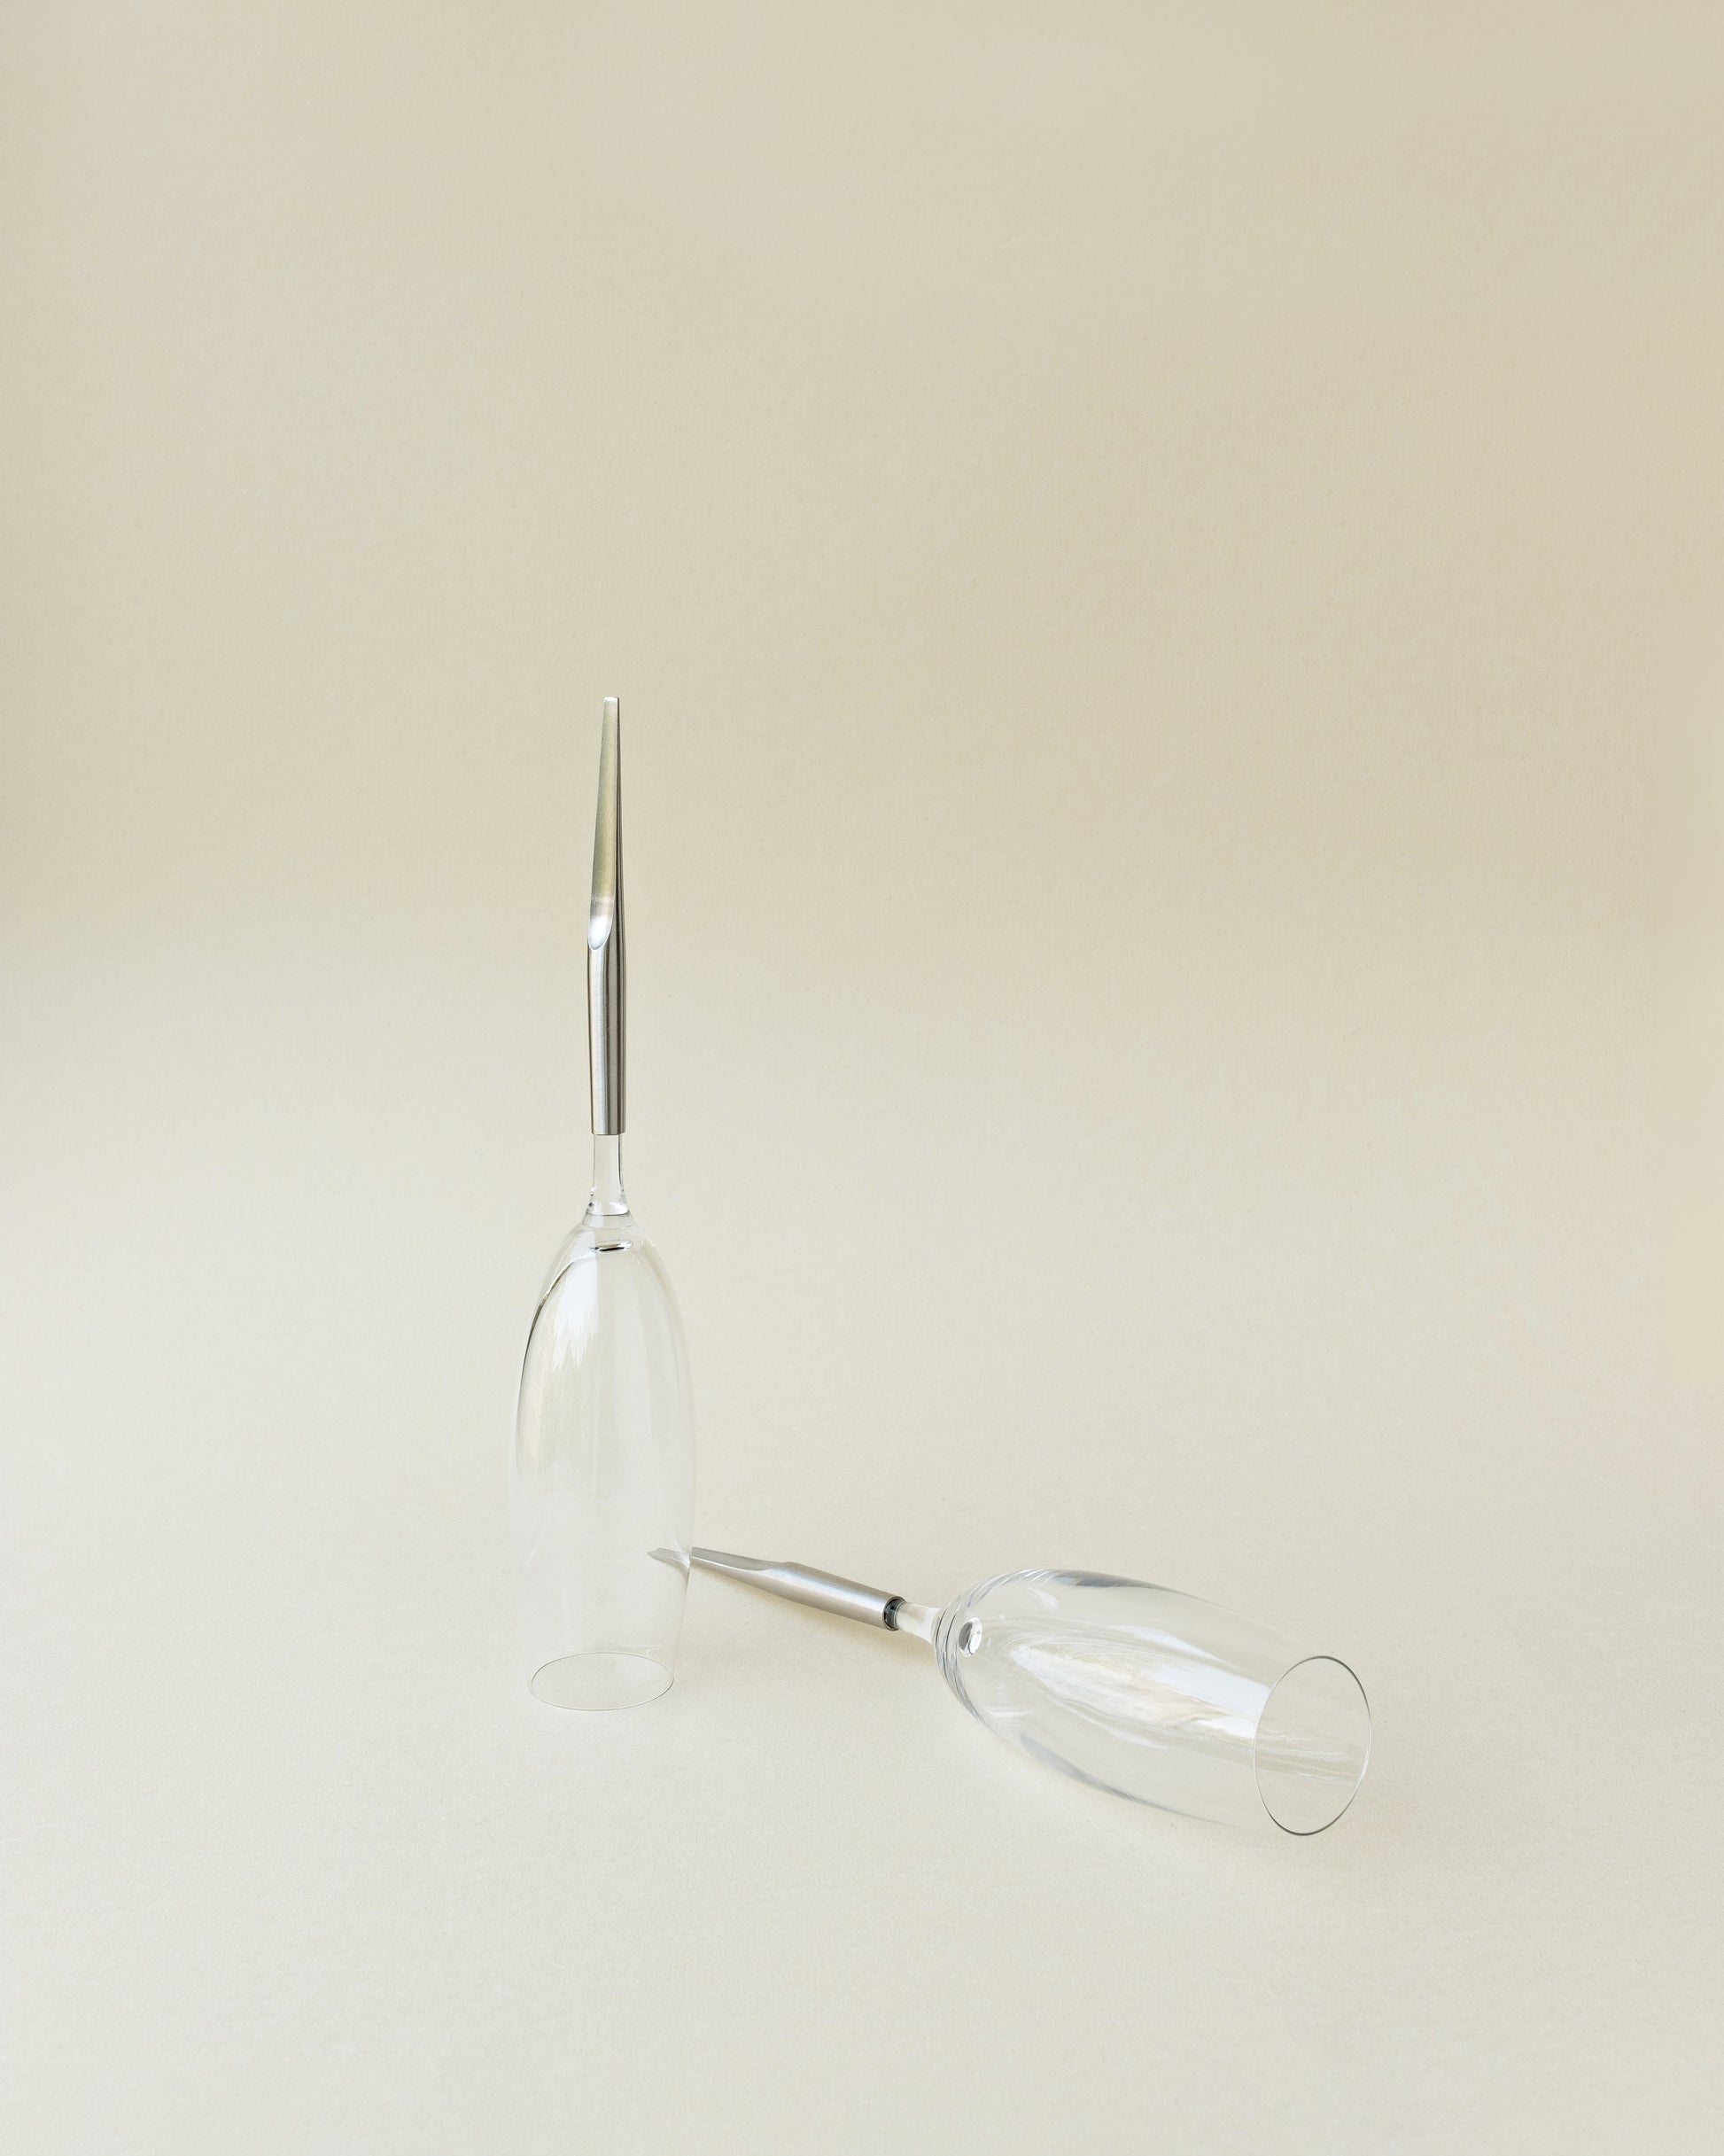 2 Crystal Champagne Glasses with metal Pin, one laying and one standing upside-down